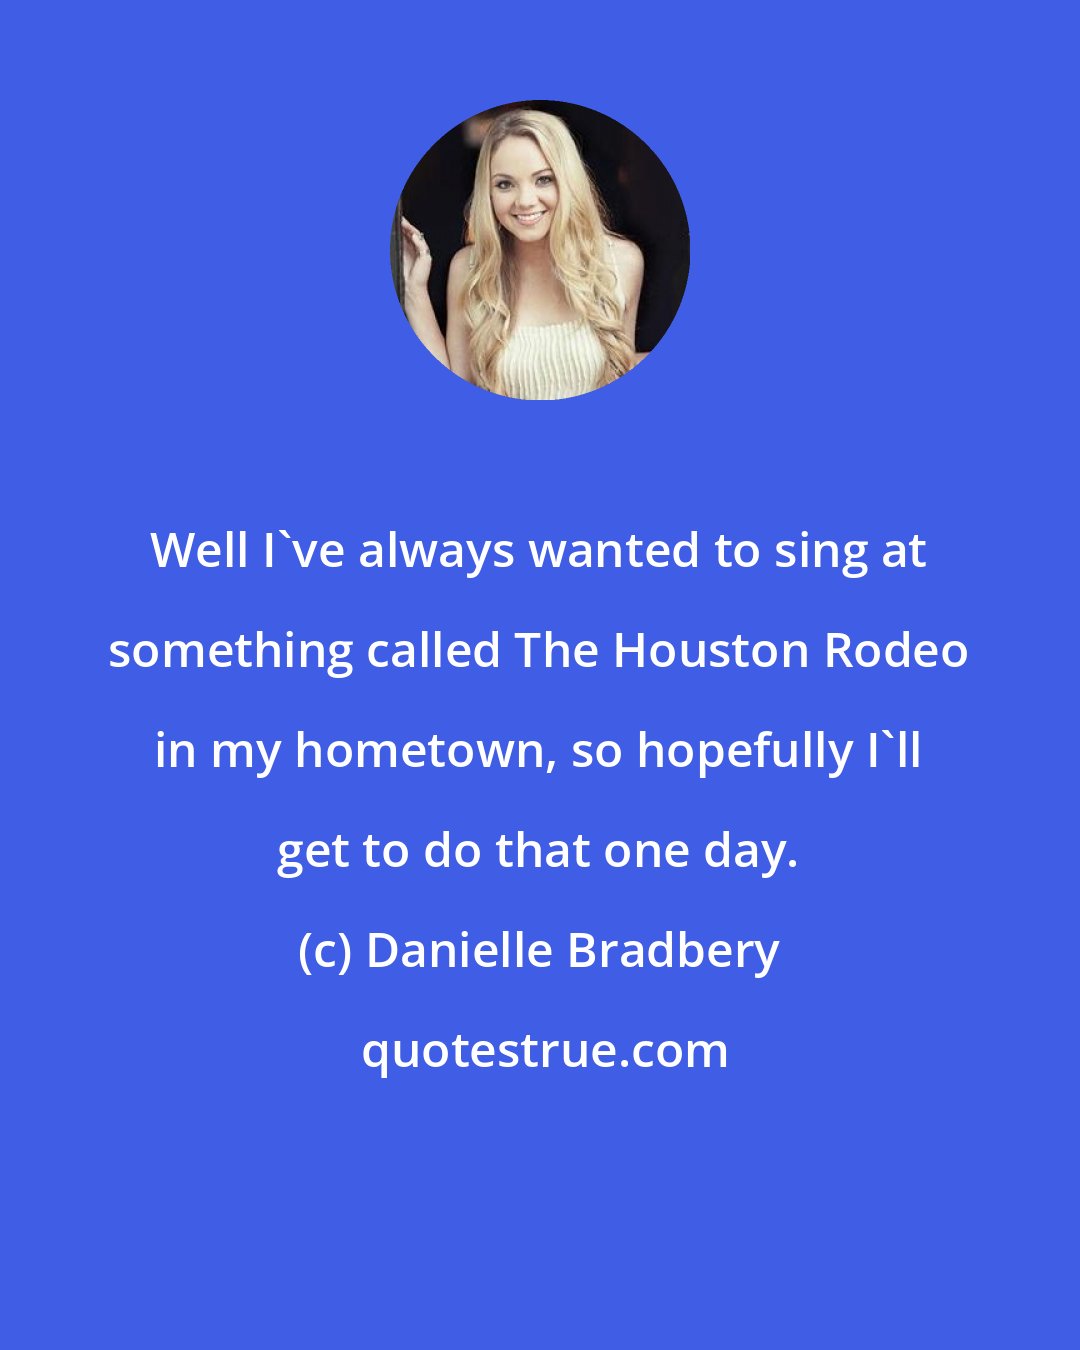 Danielle Bradbery: Well I've always wanted to sing at something called The Houston Rodeo in my hometown, so hopefully I'll get to do that one day.